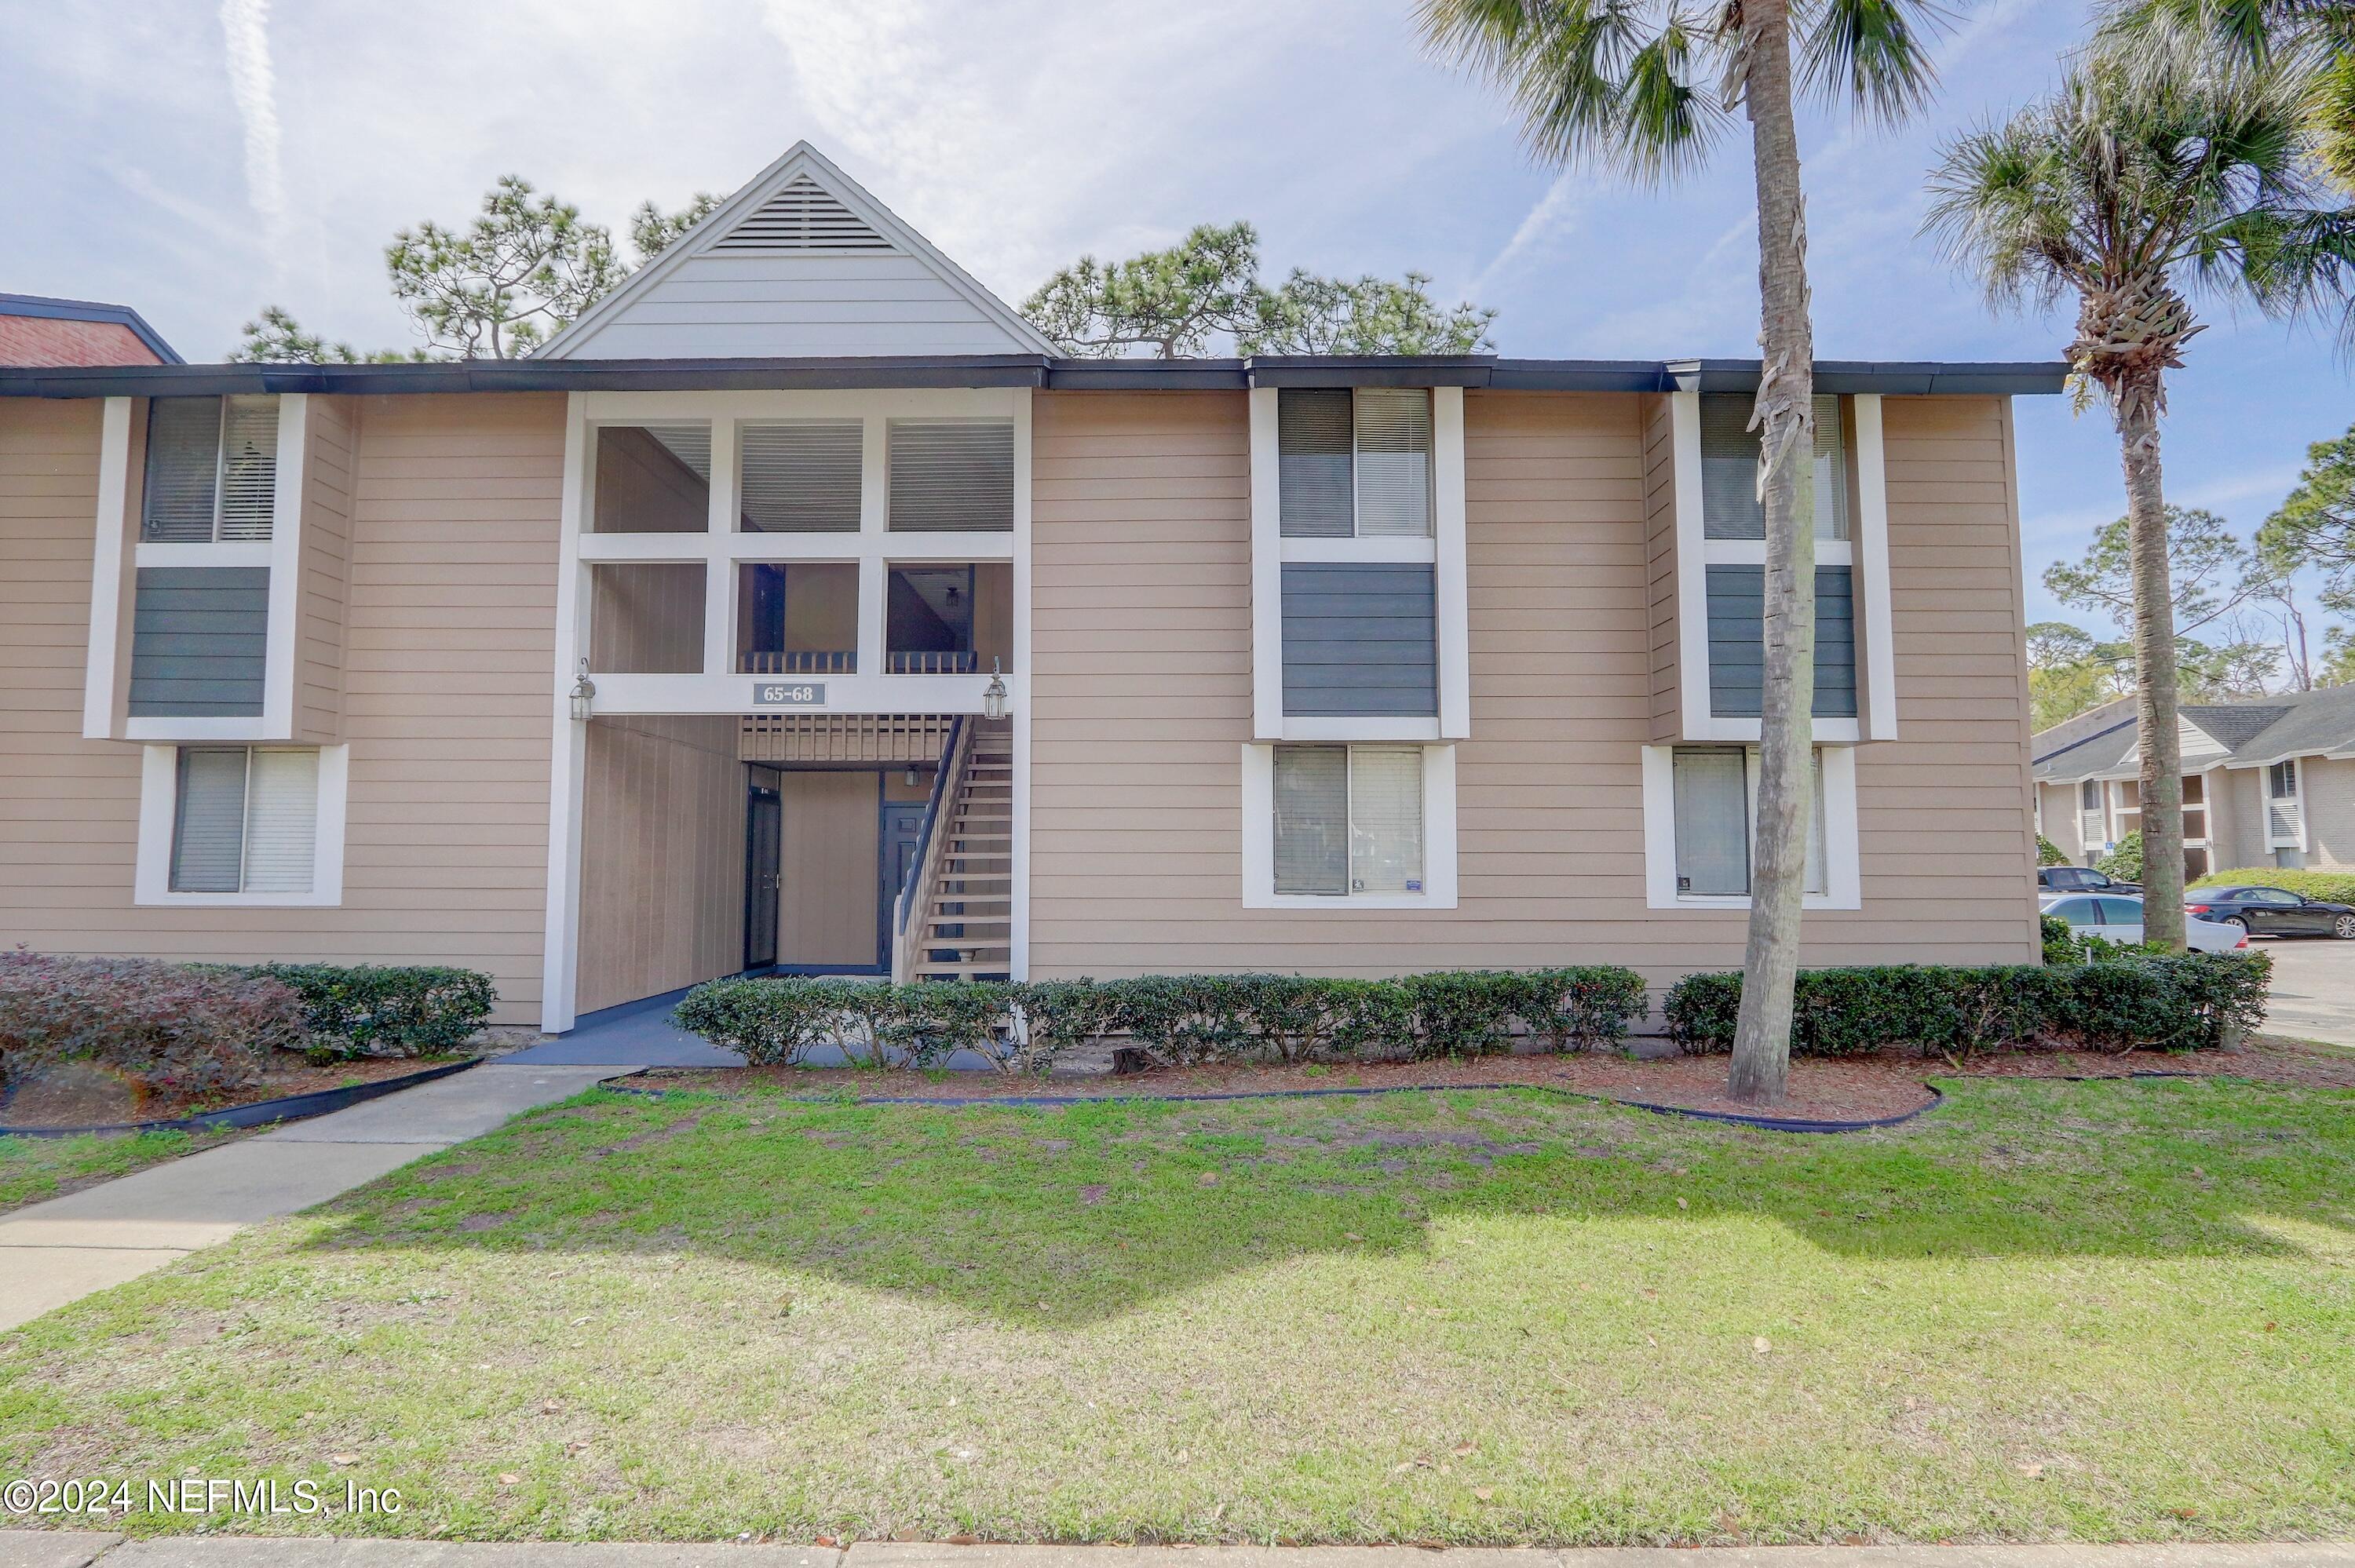 Jacksonville, FL home for sale located at 8880 Old Kings Road Unit 68, Jacksonville, FL 32257